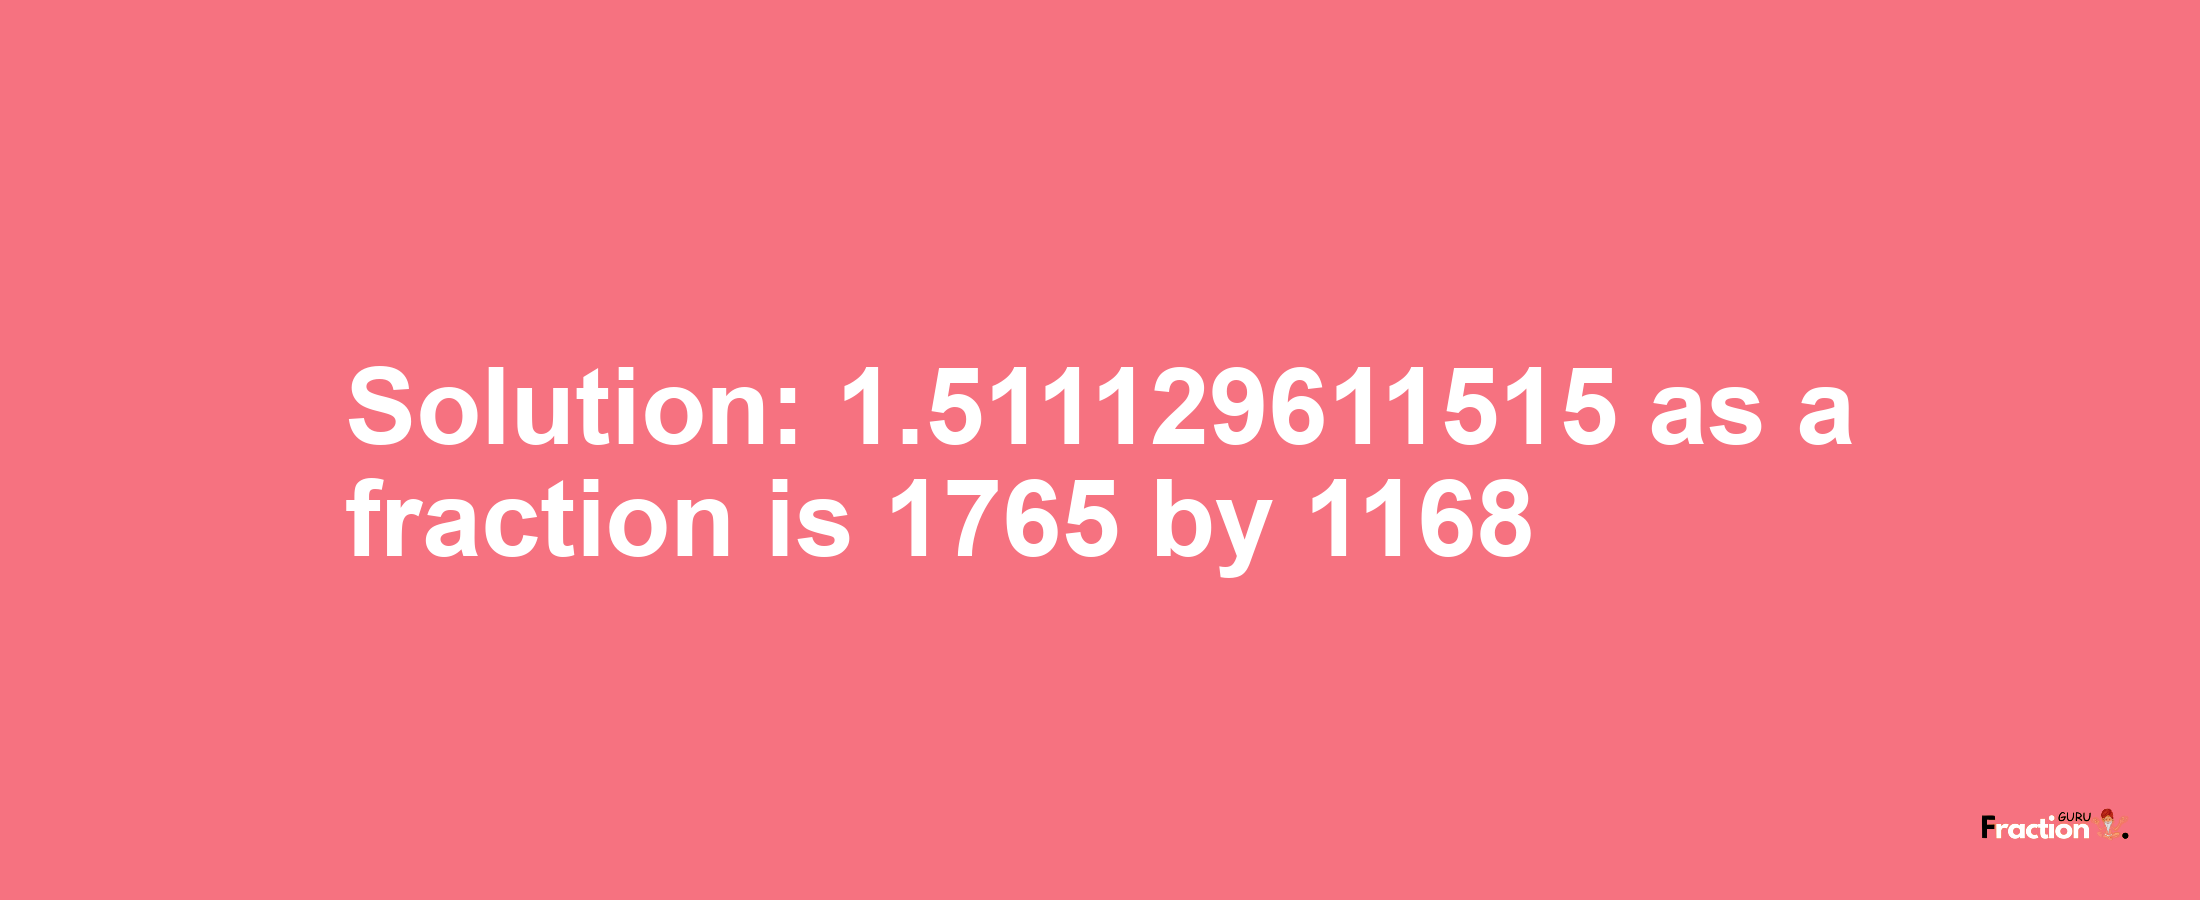 Solution:1.511129611515 as a fraction is 1765/1168